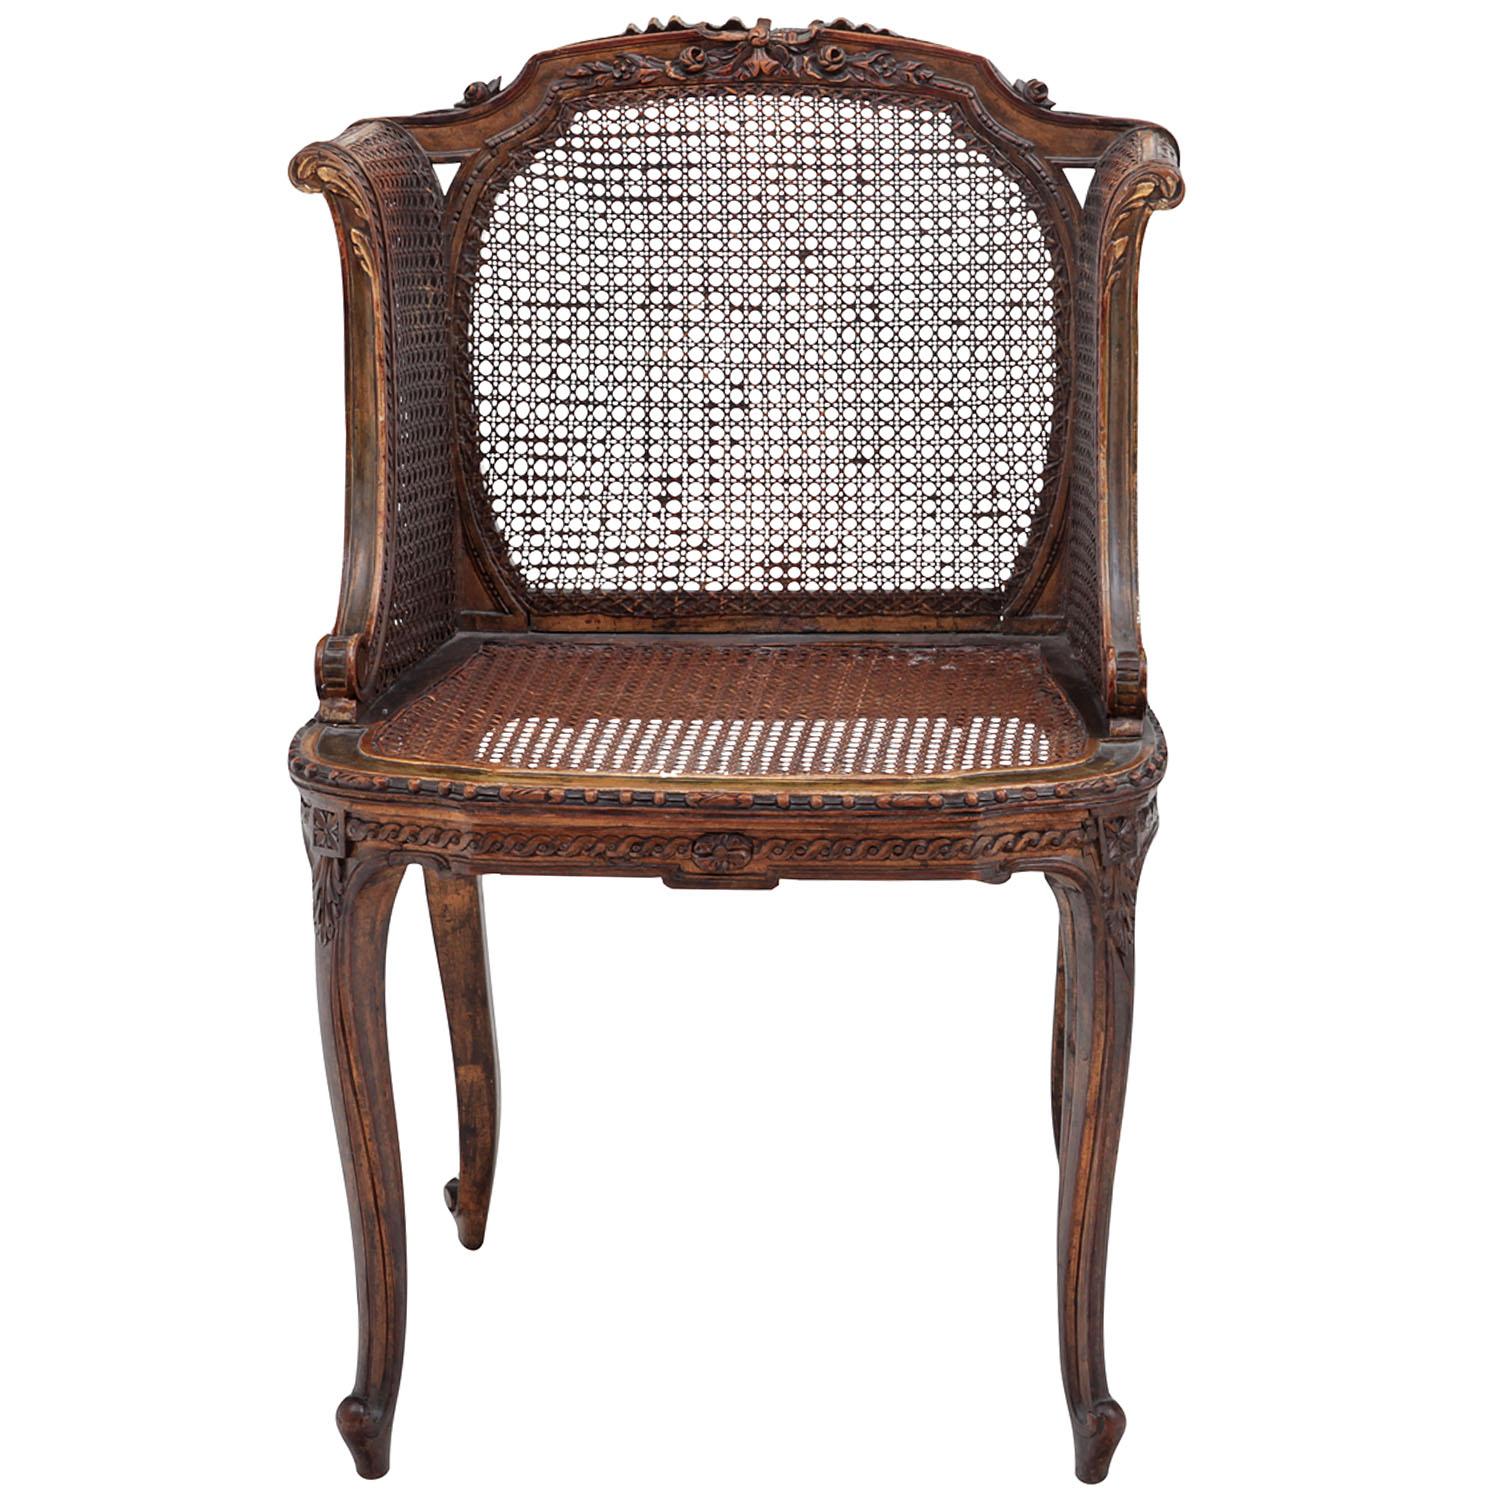 Armchair standing on slightly s-shaped legs with wickerwork seats and backrests. The frames are adorned with a band of carvings which are mostly roses. The high sides end with rocaille ornaments.